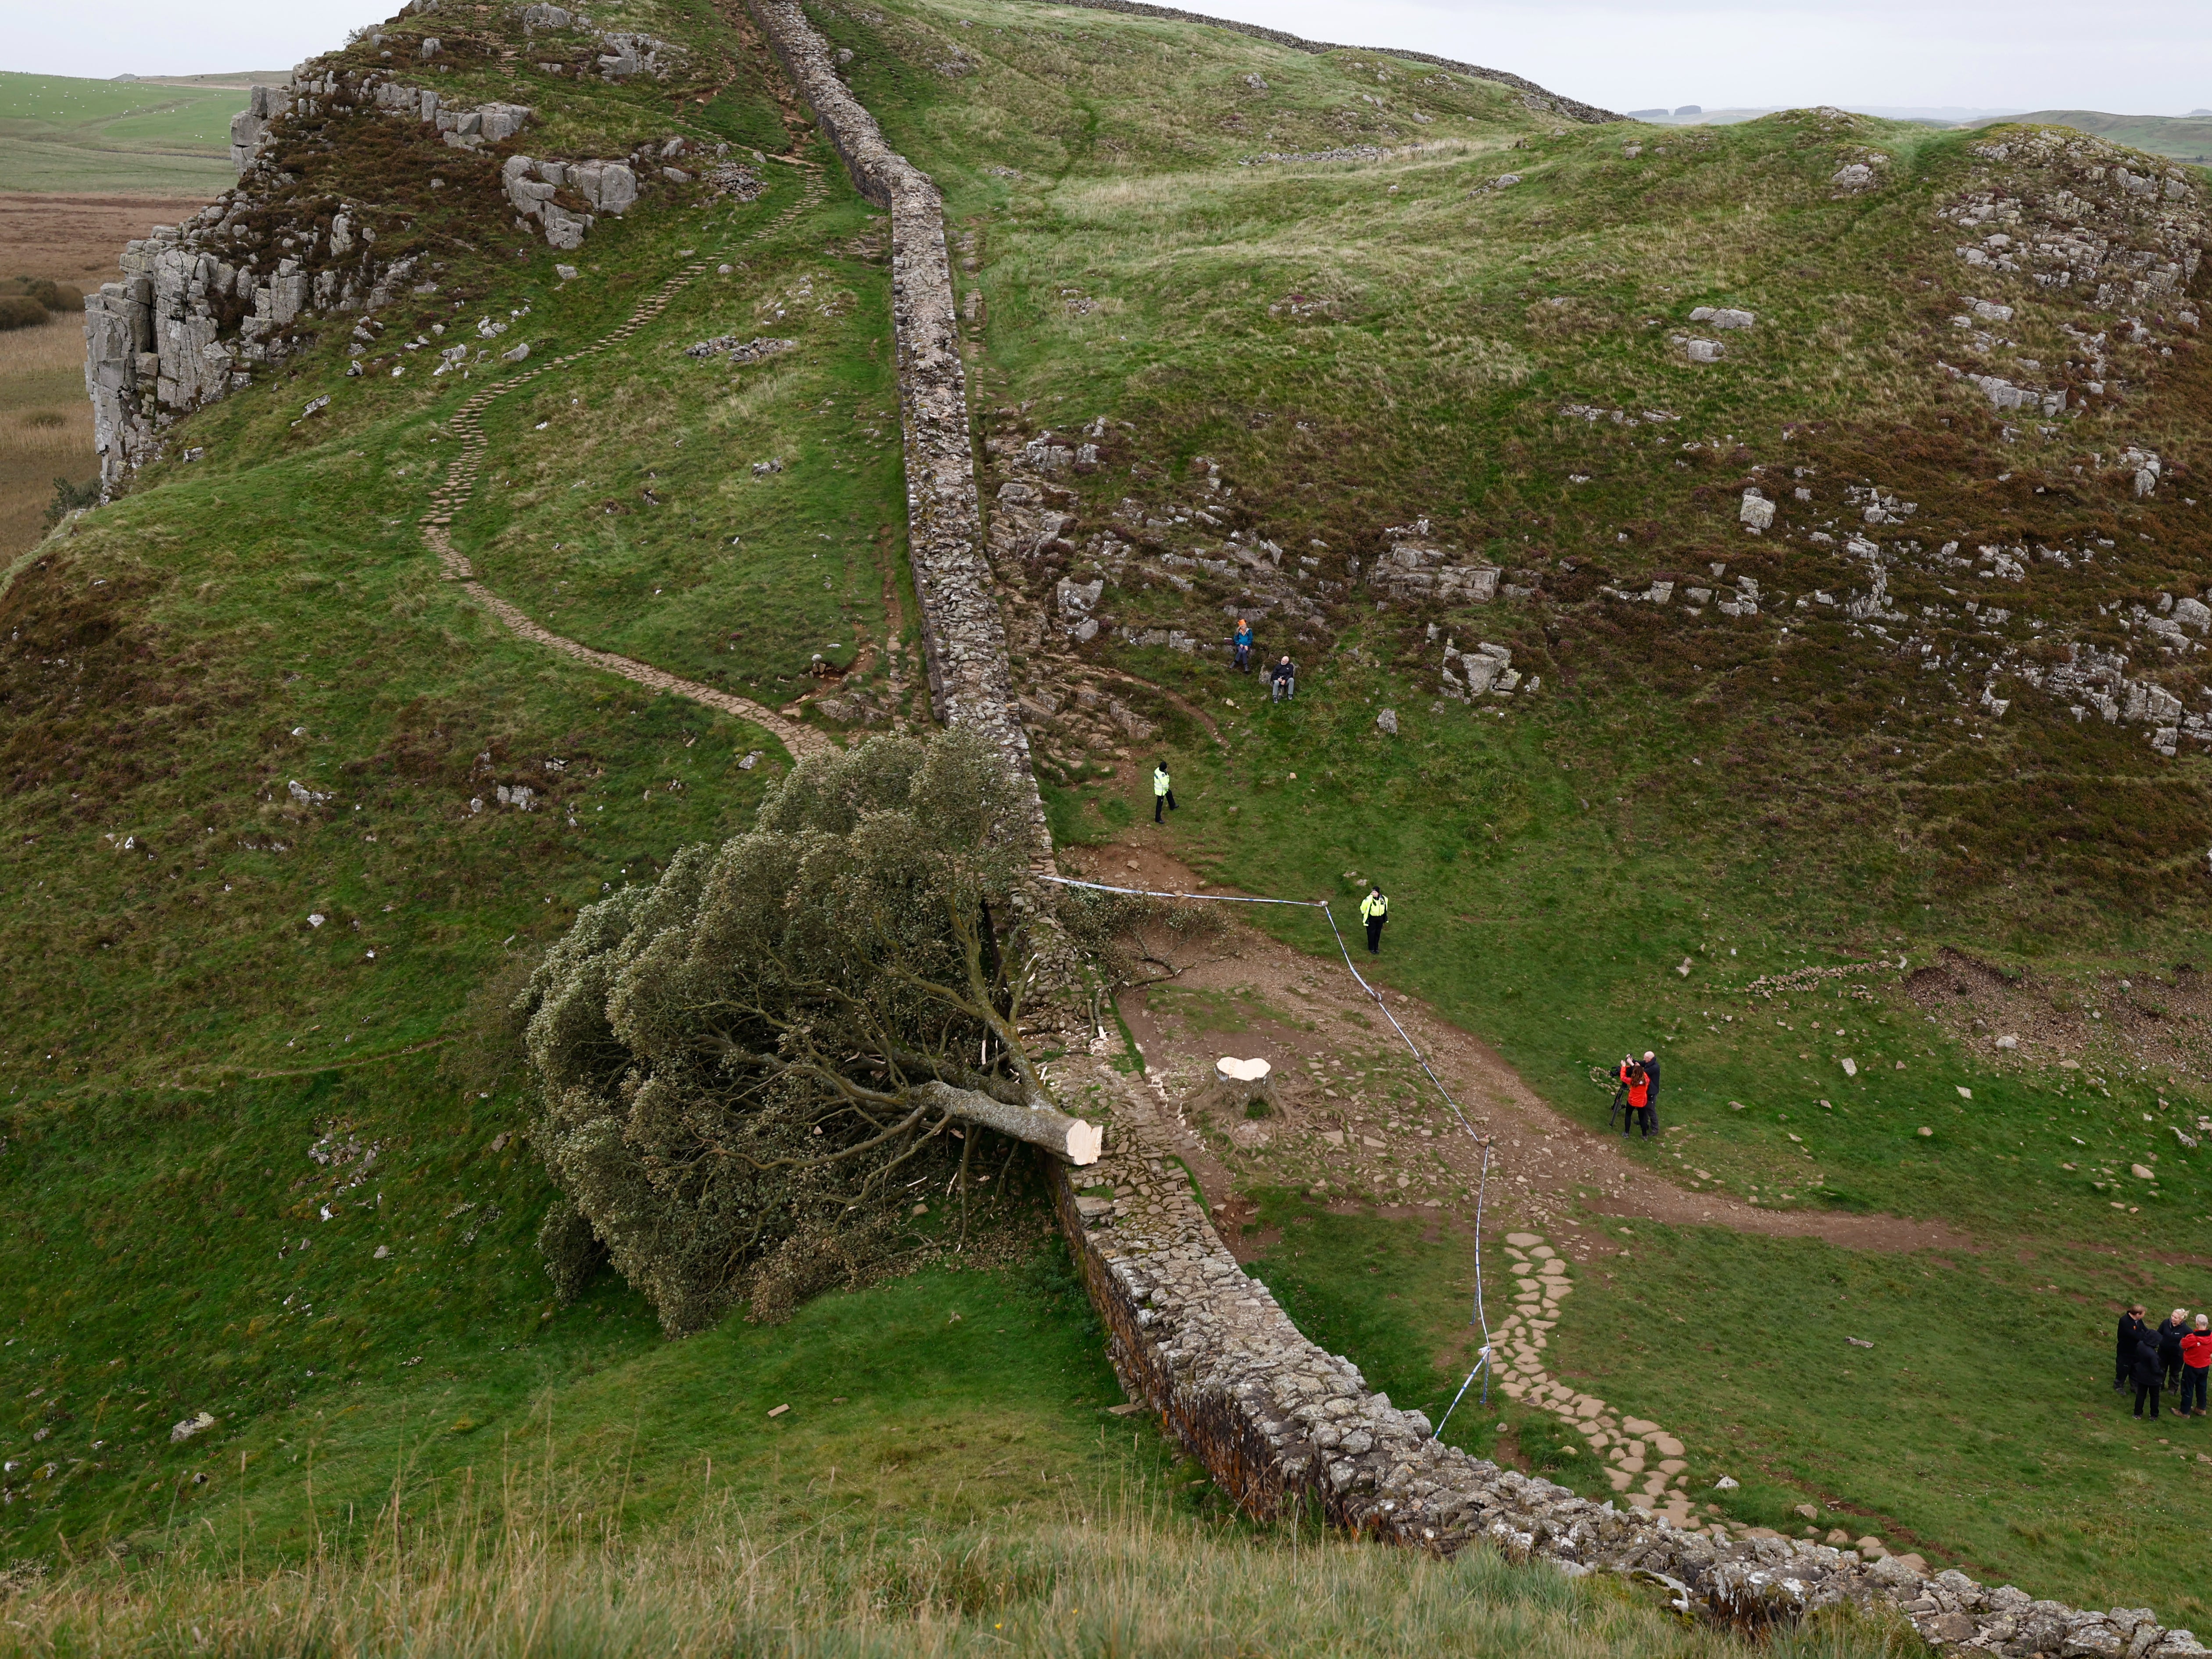 'Sycamore Gap' tree on Hadrian's Wall now lies on the ground, leaving behind only a stump in the spot it once proudly stood